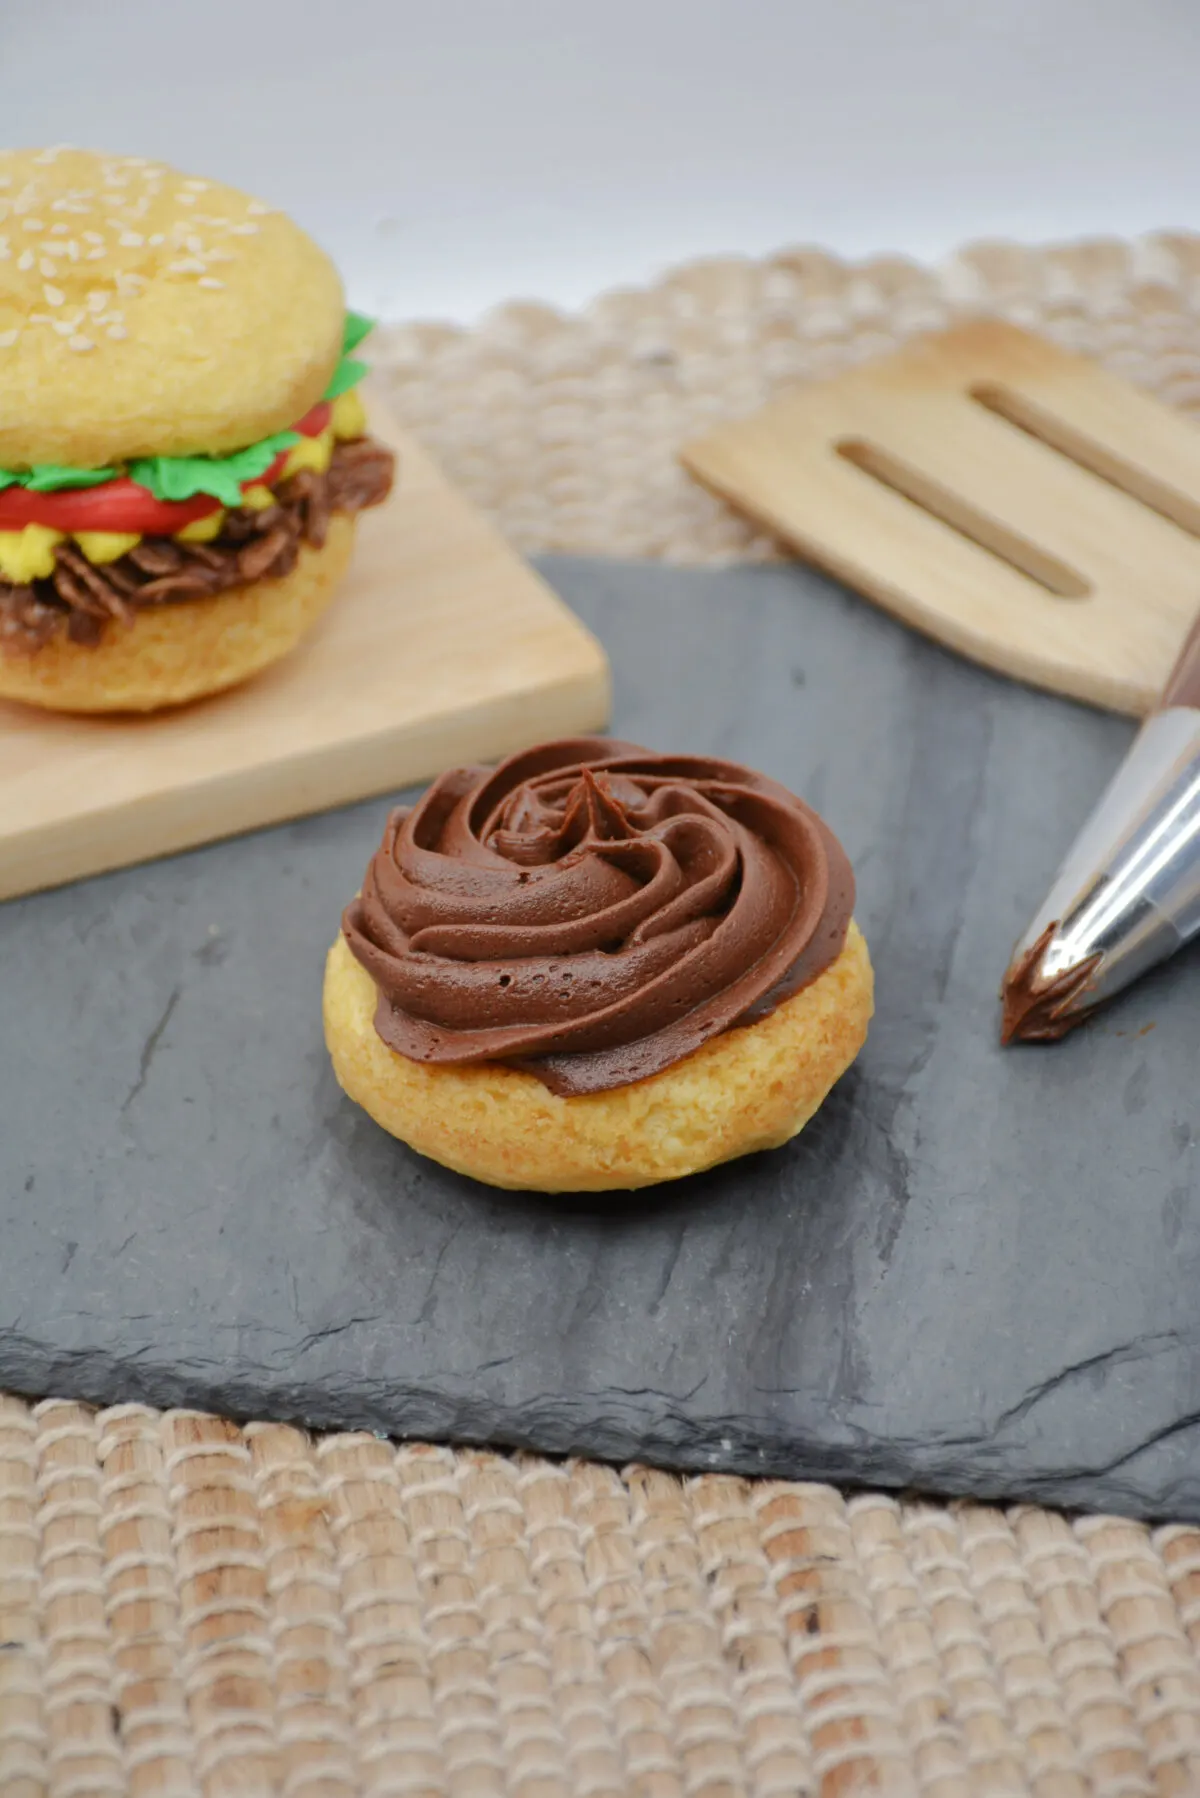 Frosting the whoopie pies with chocolate frosting.